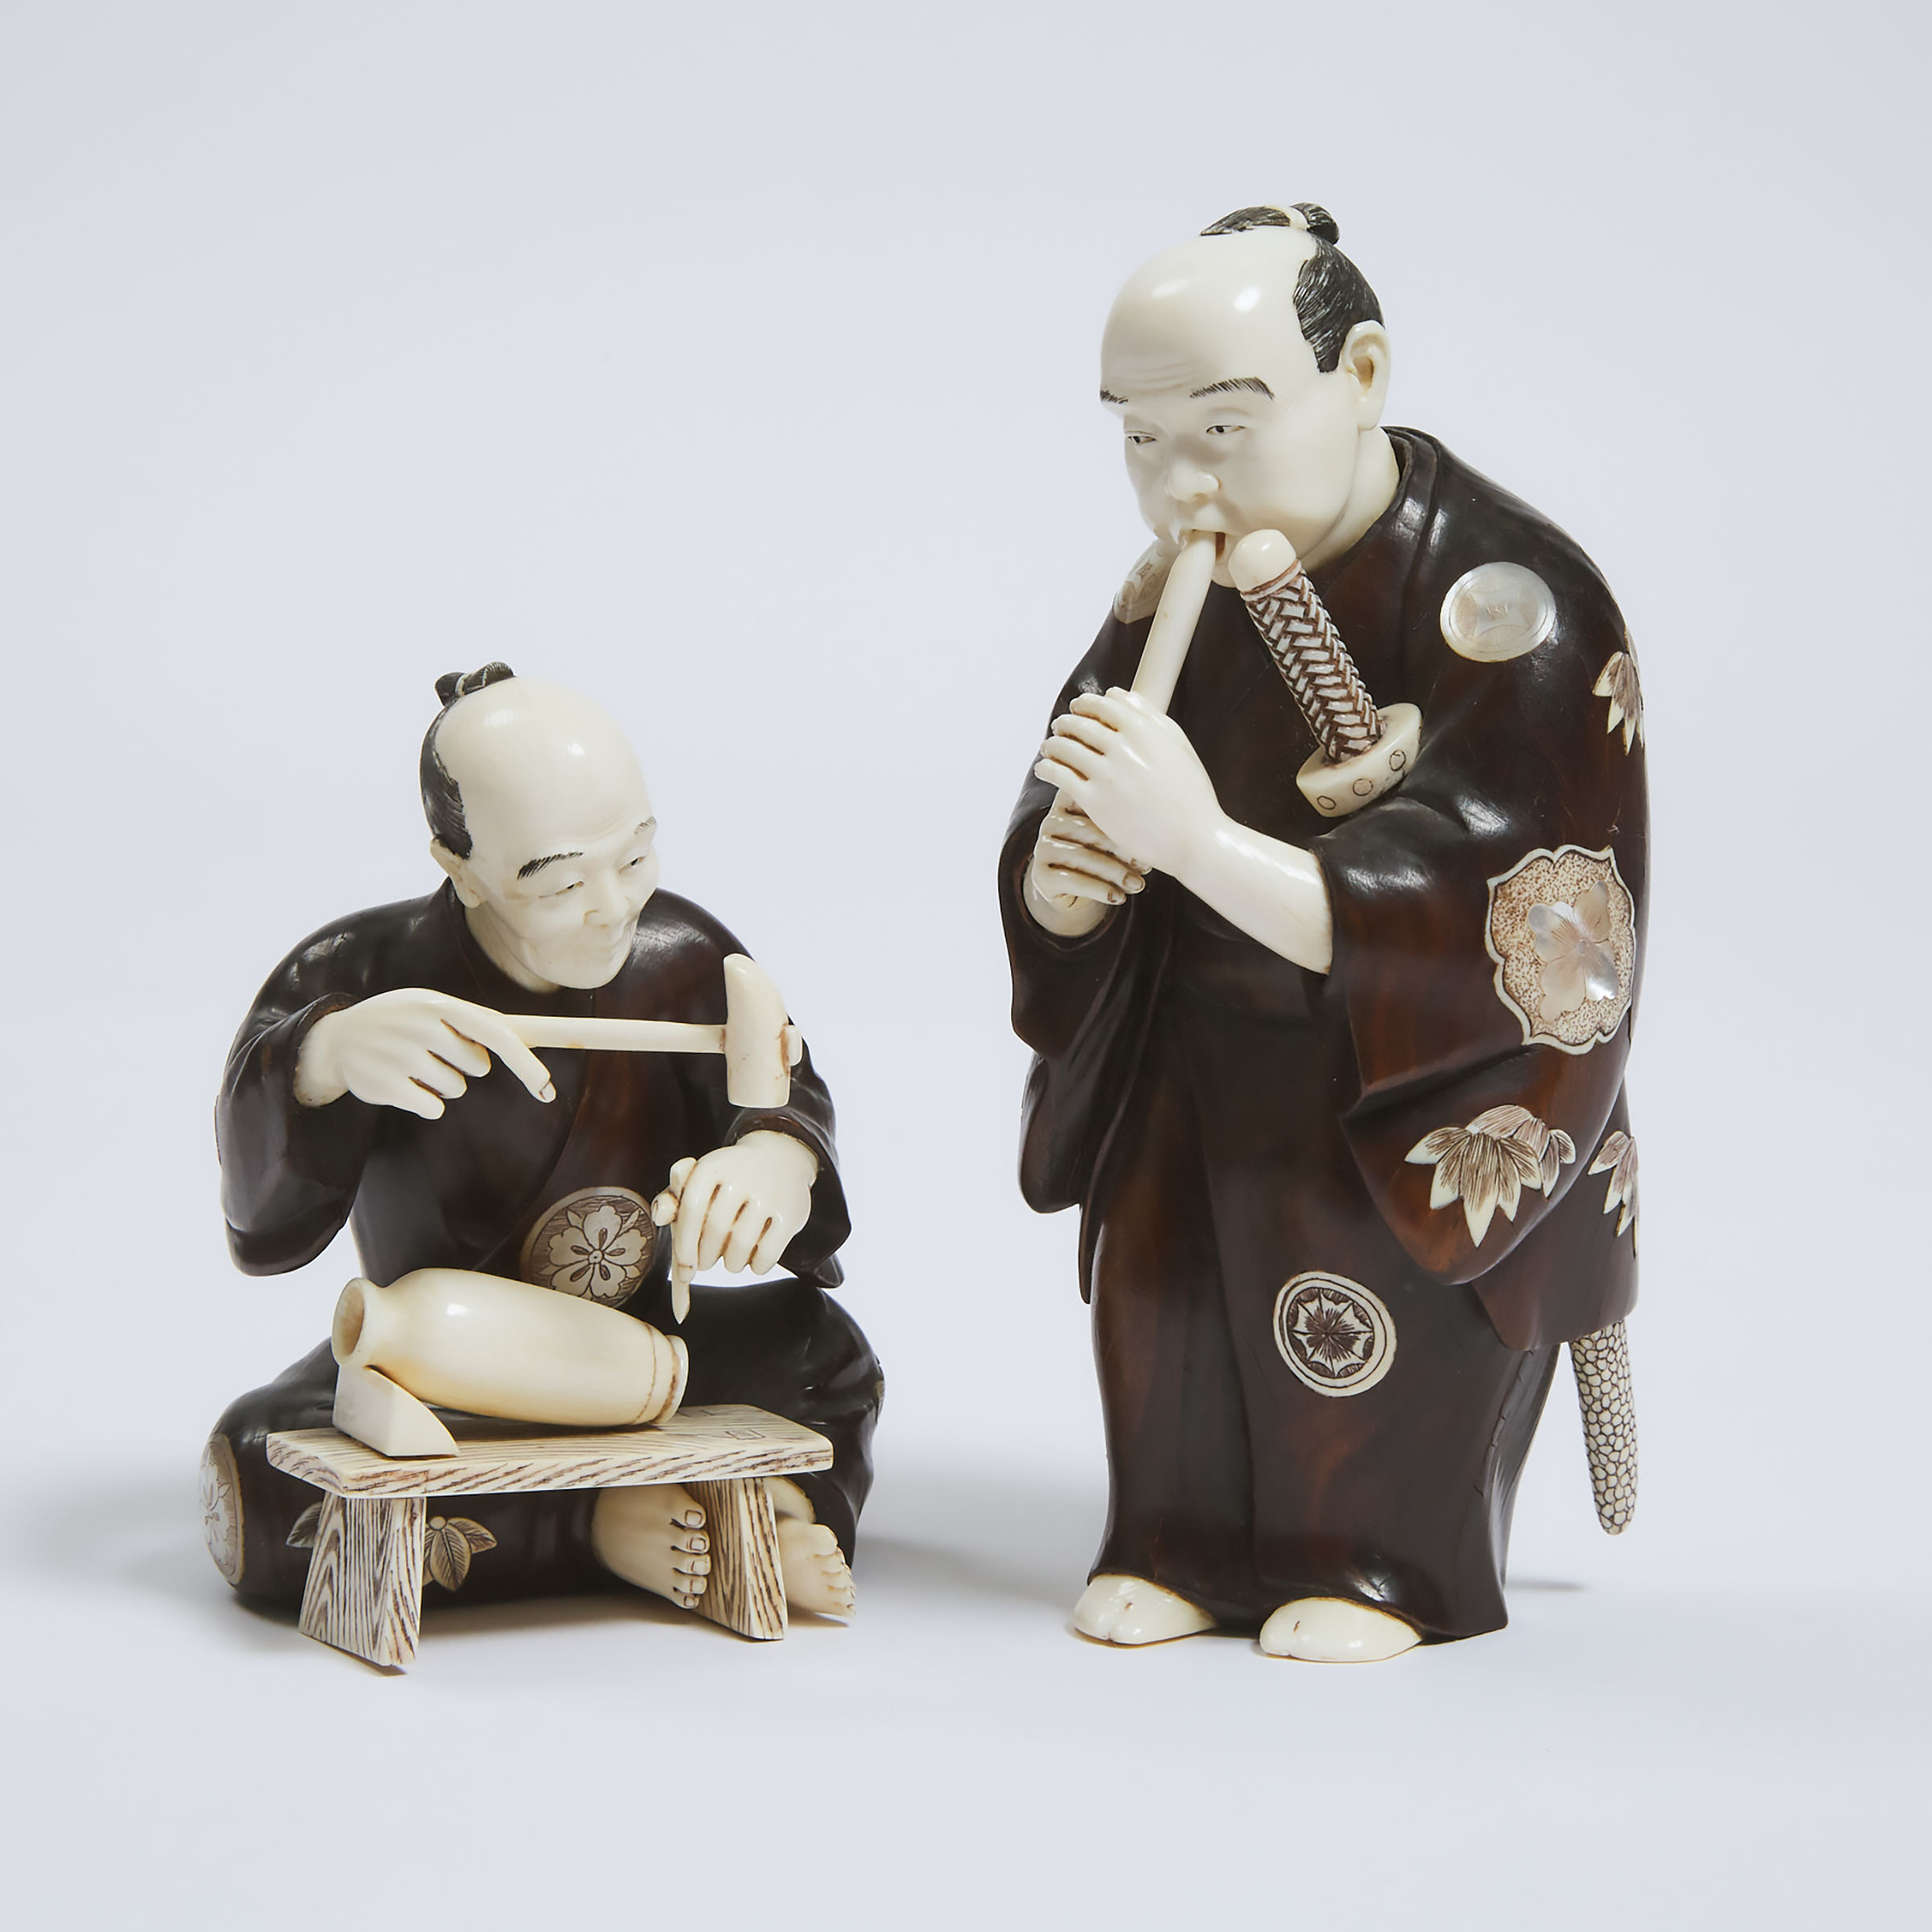 Two Wood and Ivory Okimono of a Samurai and a Craftsman, One Signed Gyokko, Meiji Period (1868-1912)